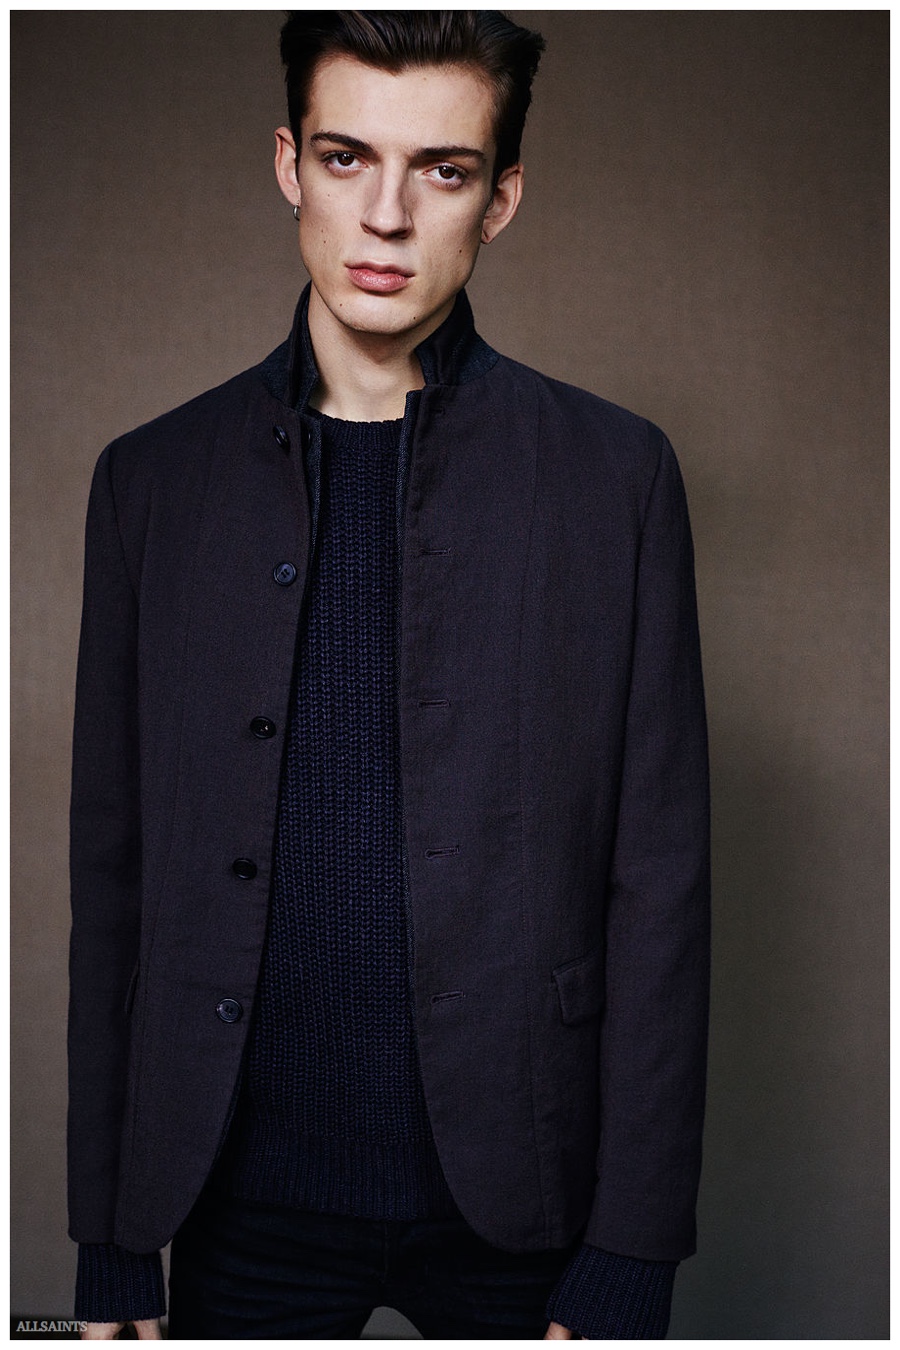 AllSaints Offers Up Tailoring & Leather for January 2015 Men's Lookbook ...